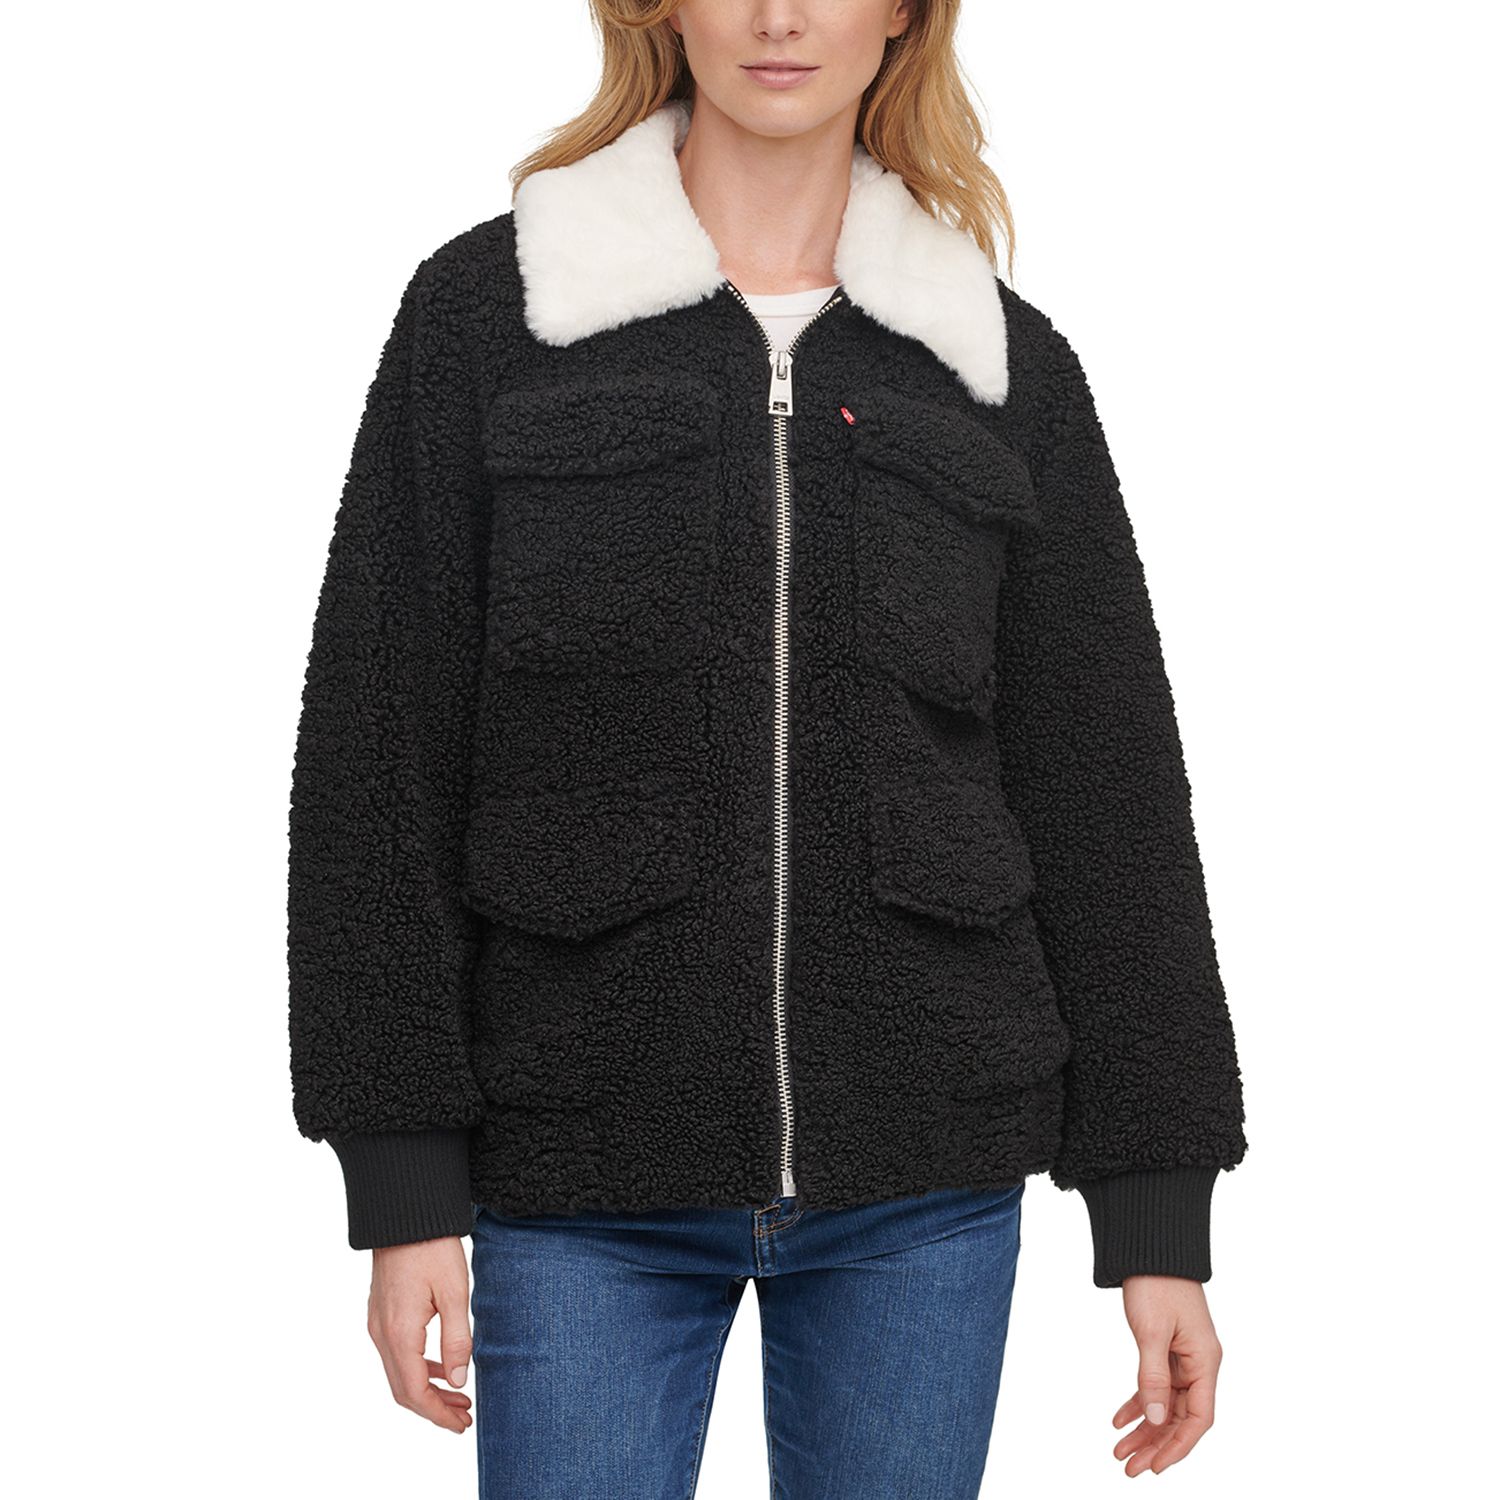 Image for Levi's Women's Faux-Fur Collar Sherpa Bomber Jacket at Kohl's.